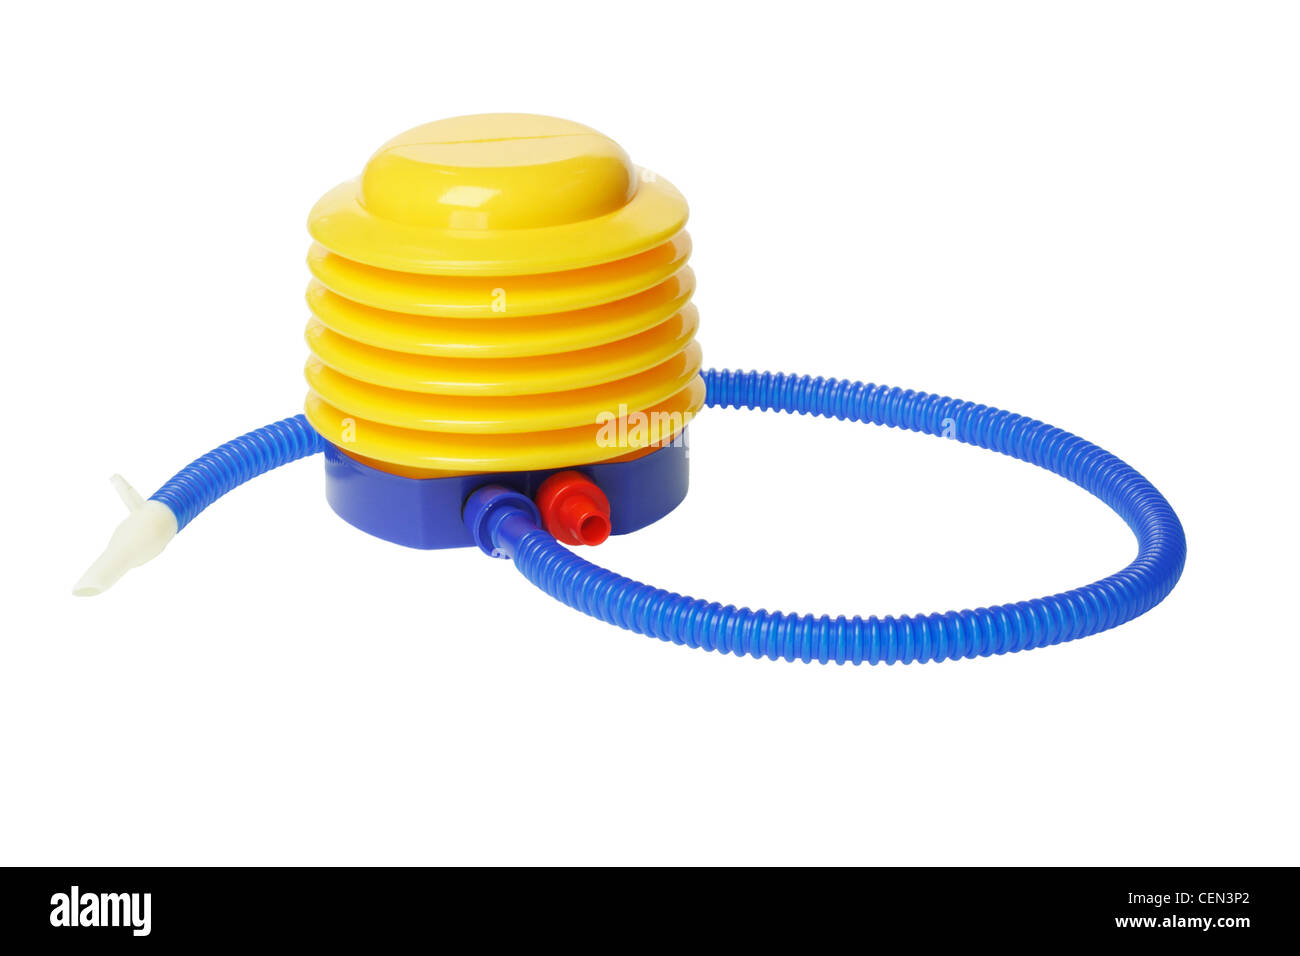 Colorful Plastic Air Pump on White Background Stock Photo